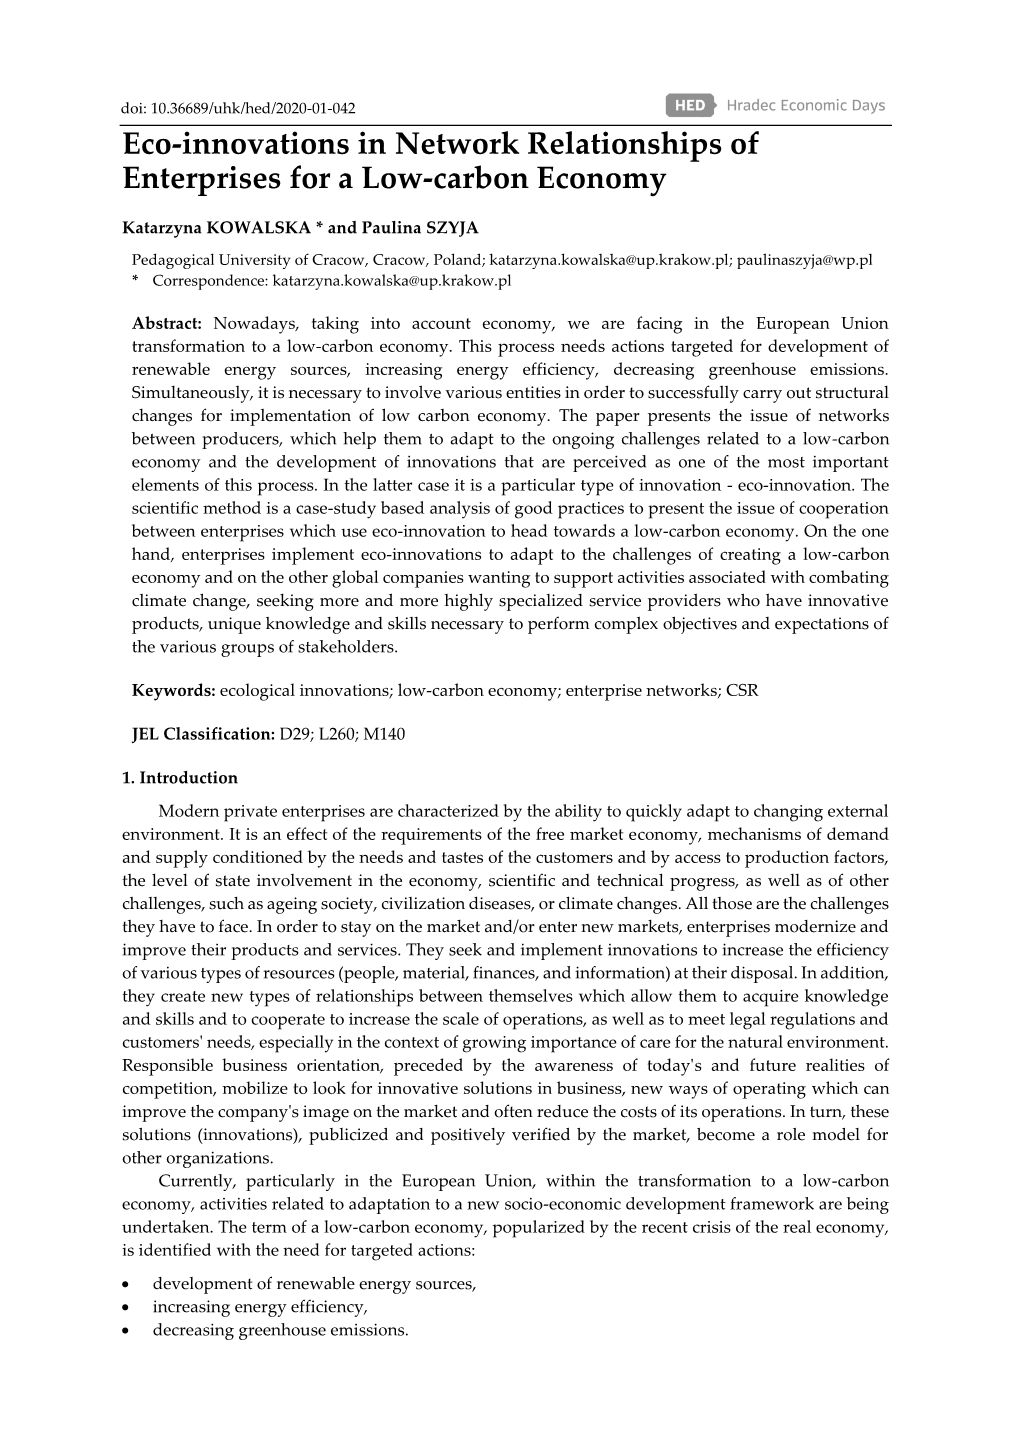 Eco-Innovations in Network Relationships of Enterprises for a Low-Carbon Economy